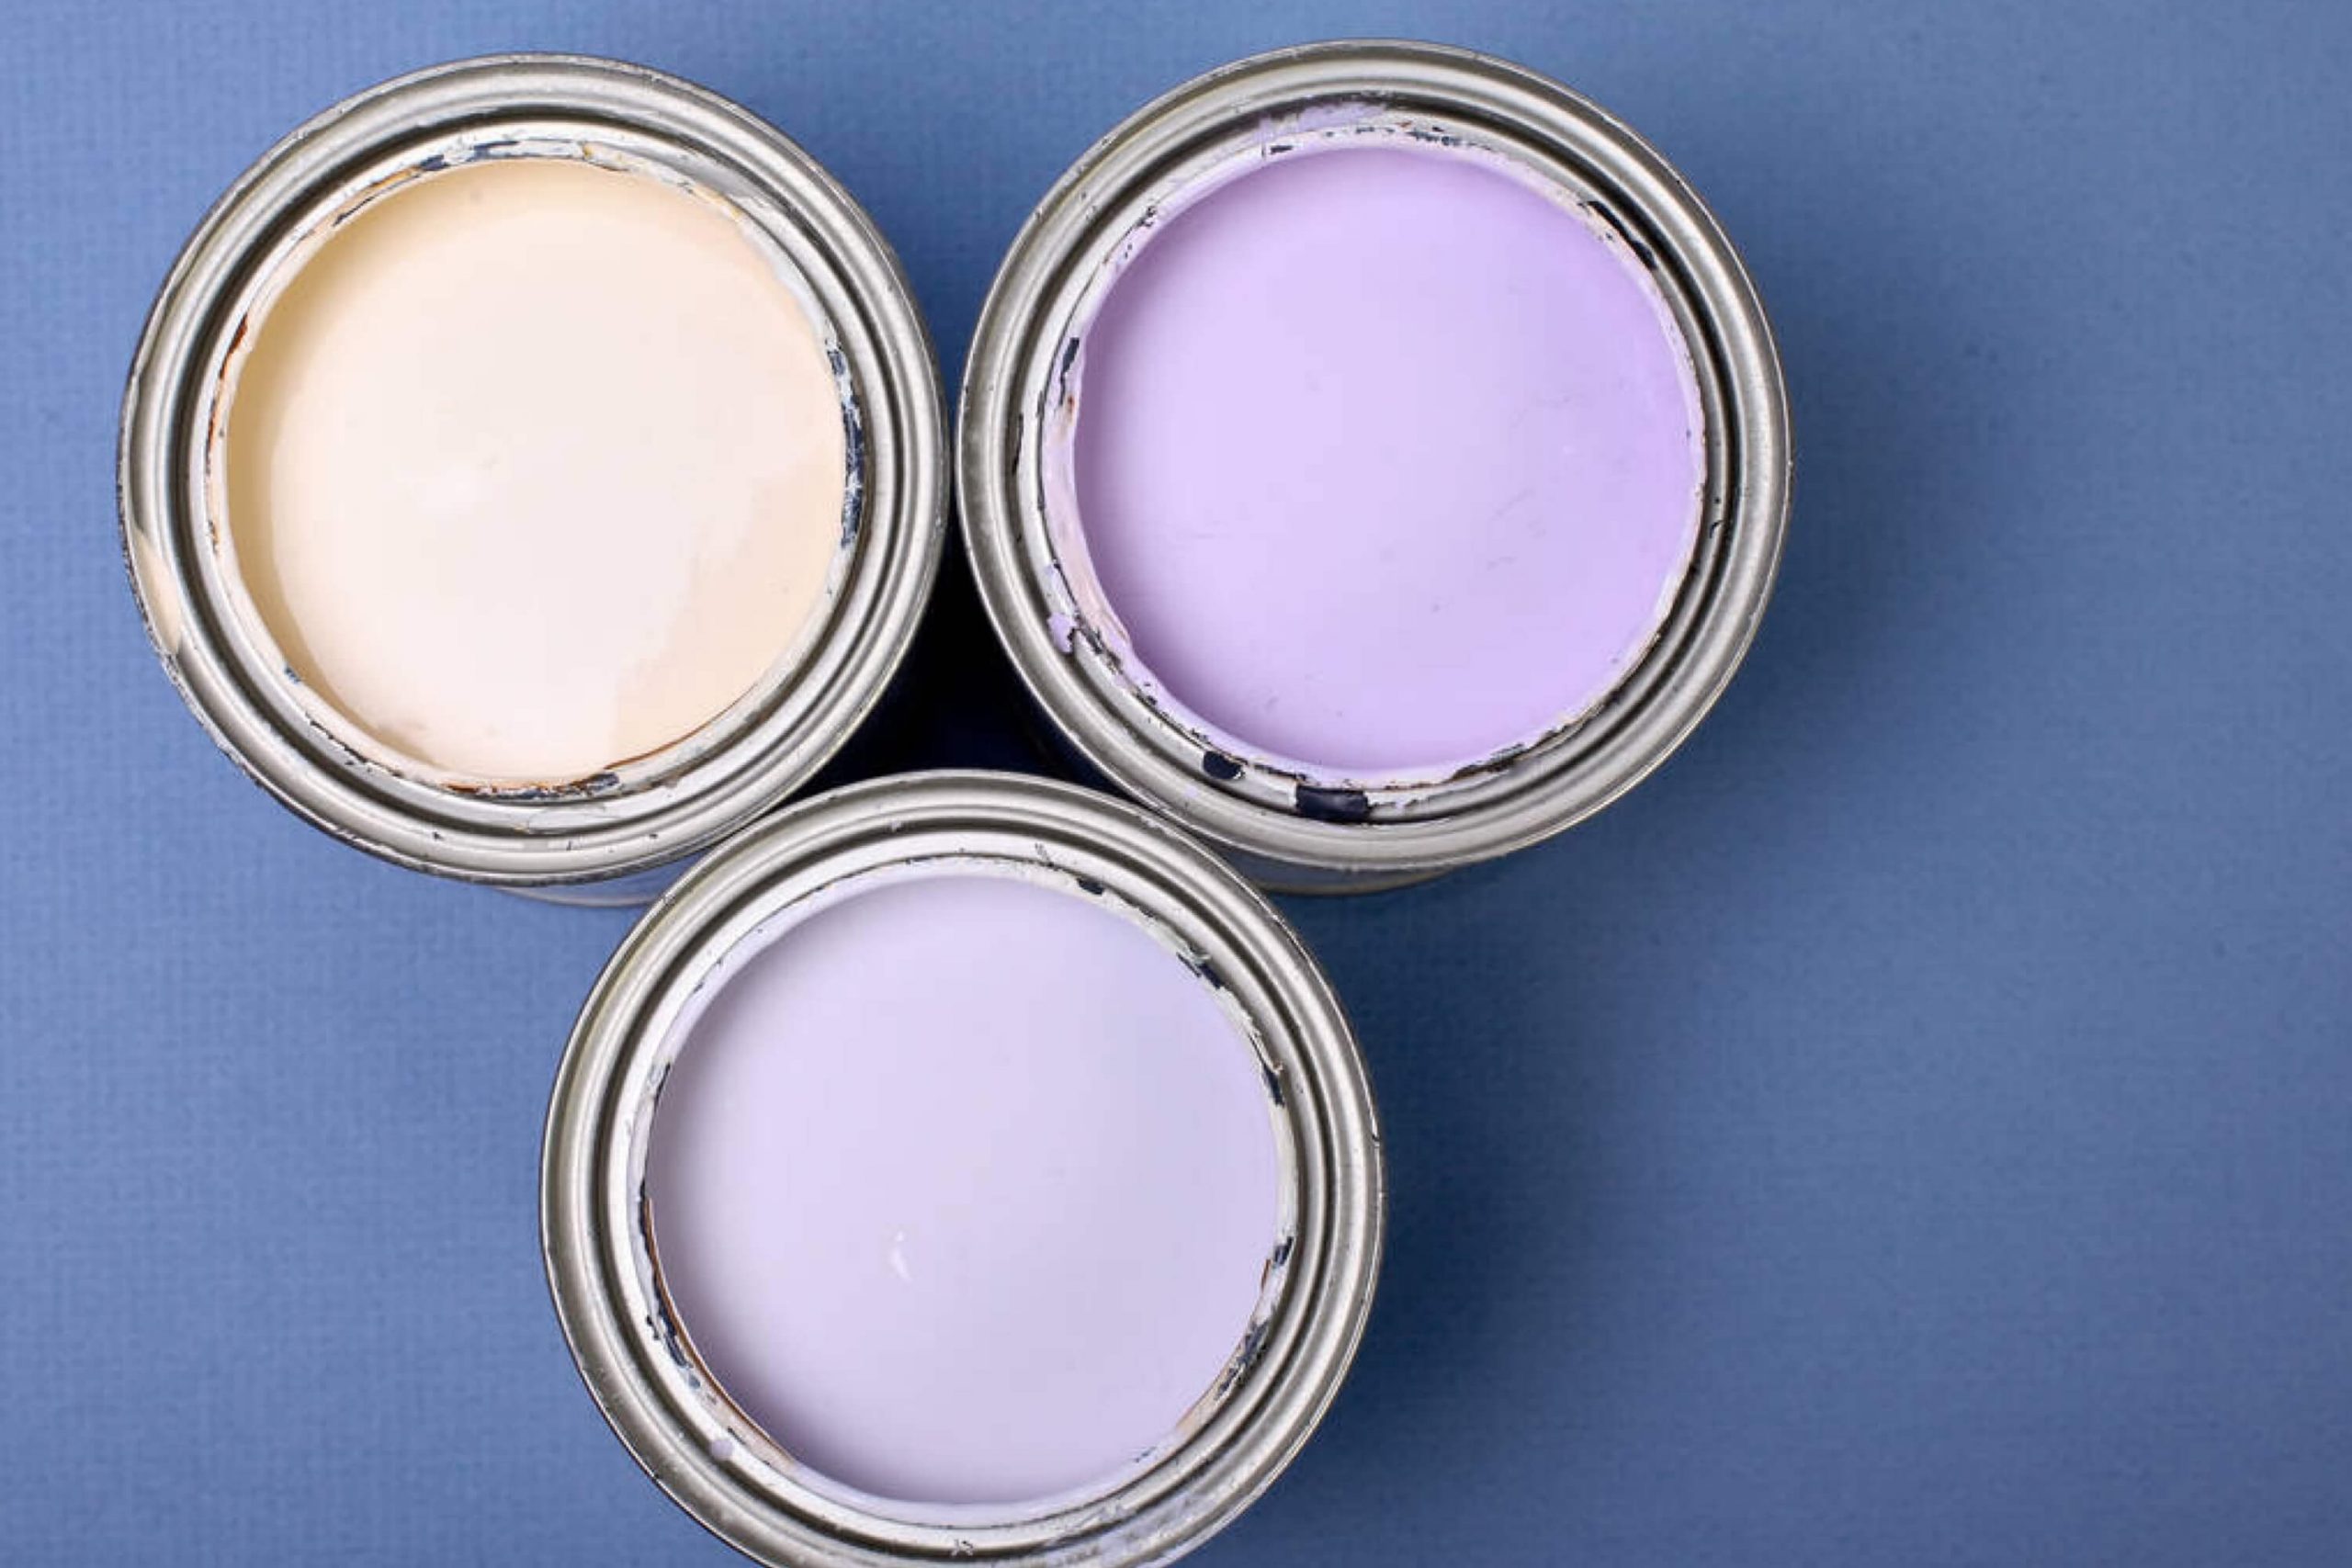 When Should I Use Oil-Based Paints